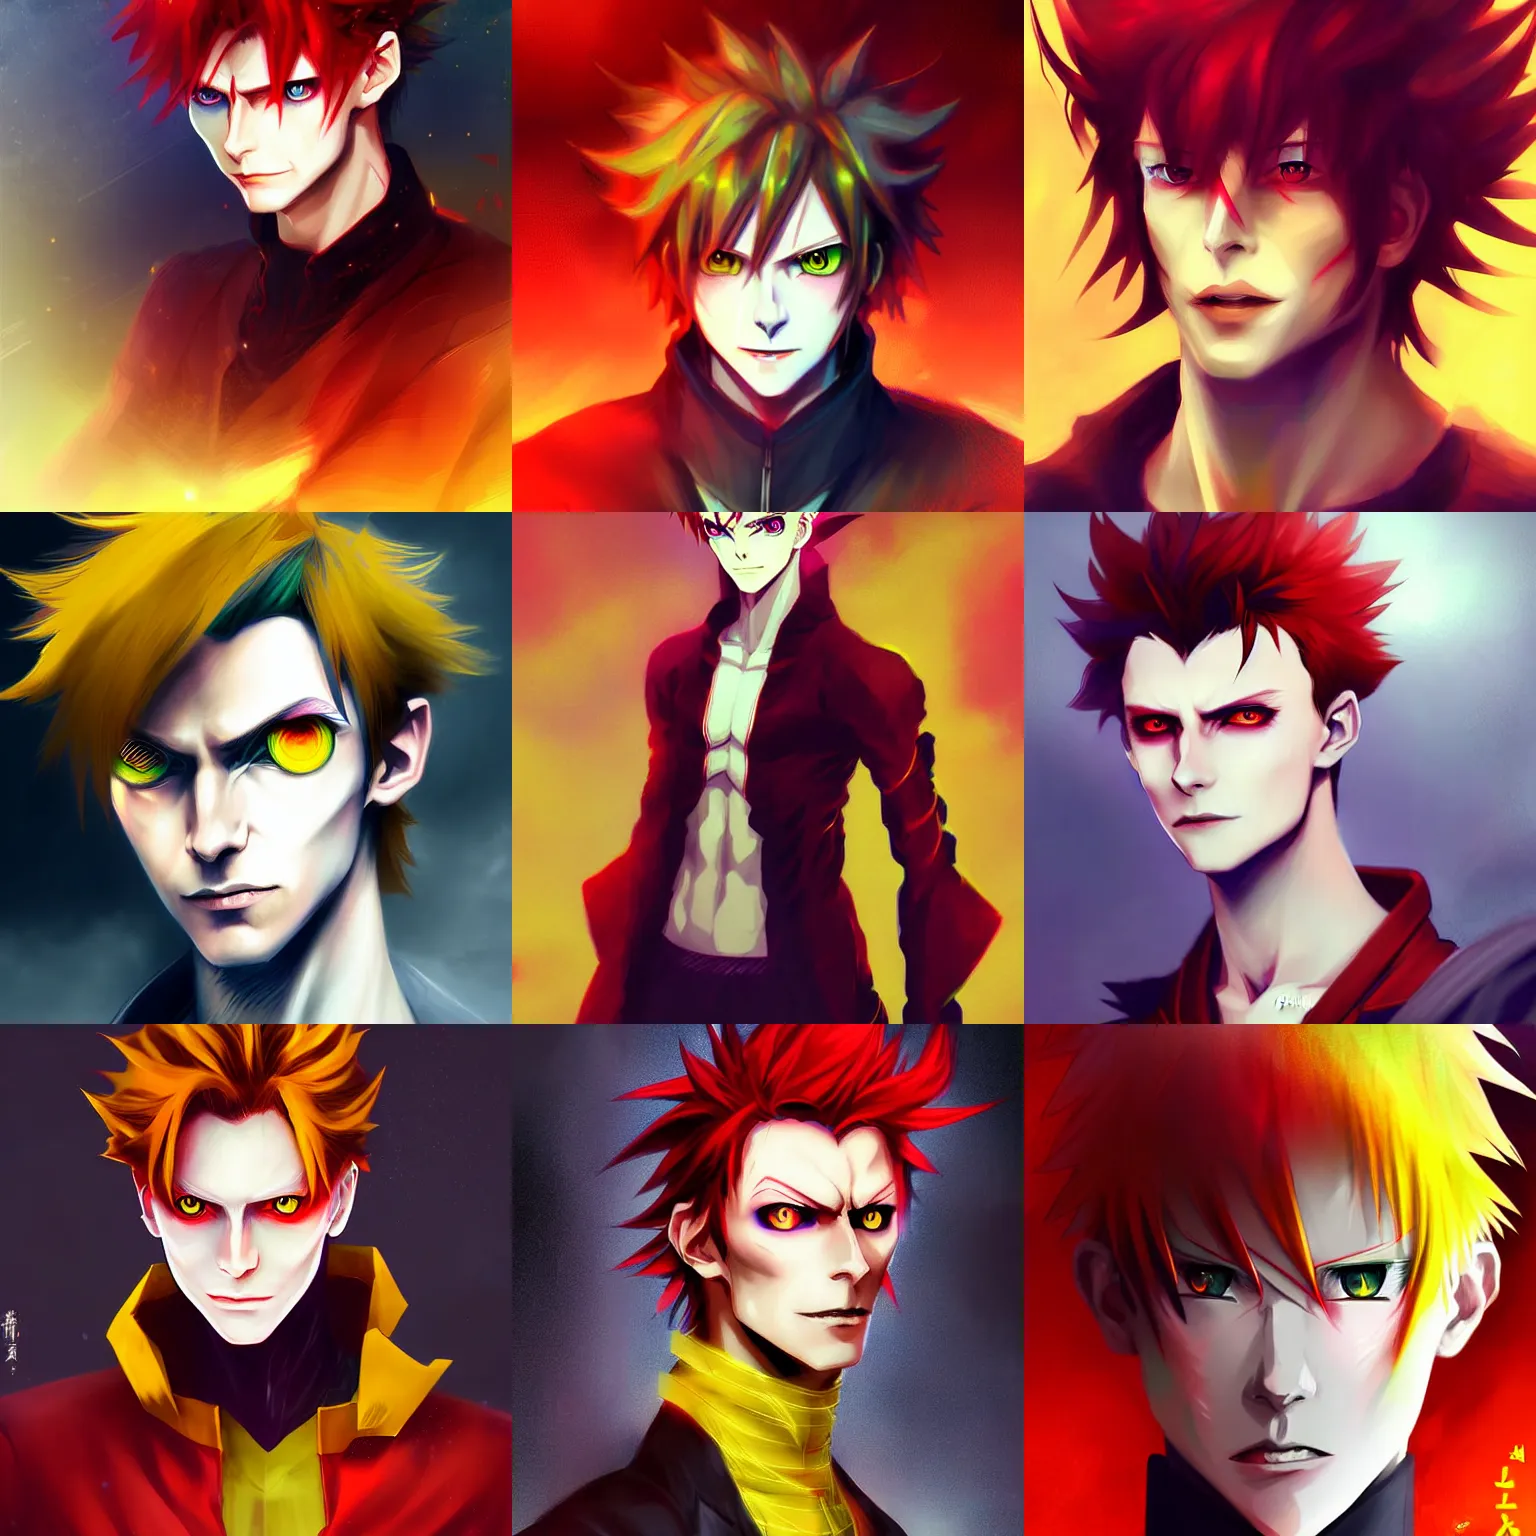 Prompt: portrait of anime male 2 0 years old male evil sharp features yellow iris, very narrow yellow glowing eyes red red soft tousled crimson hair smirk anime hunterpedia pixiv fanbox concept art, matte, sharp focus hisoka morow tom hiddleston david bowie mashup art by wlop ruan jia